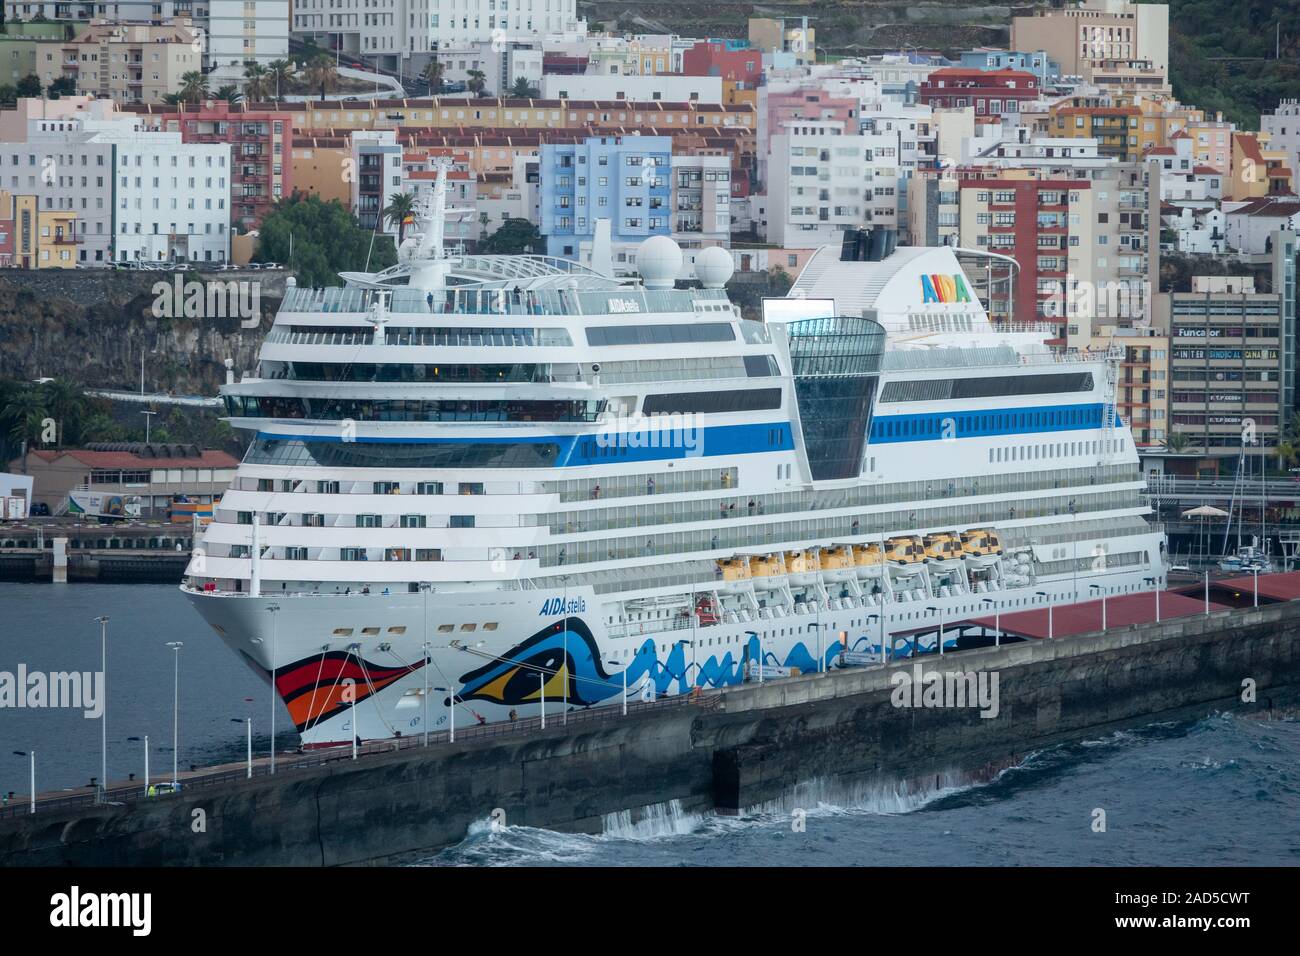 View of the Cruise Ship, Aida Stella from the P&O Ventura as it leaves the port of La Palma Stock Photo